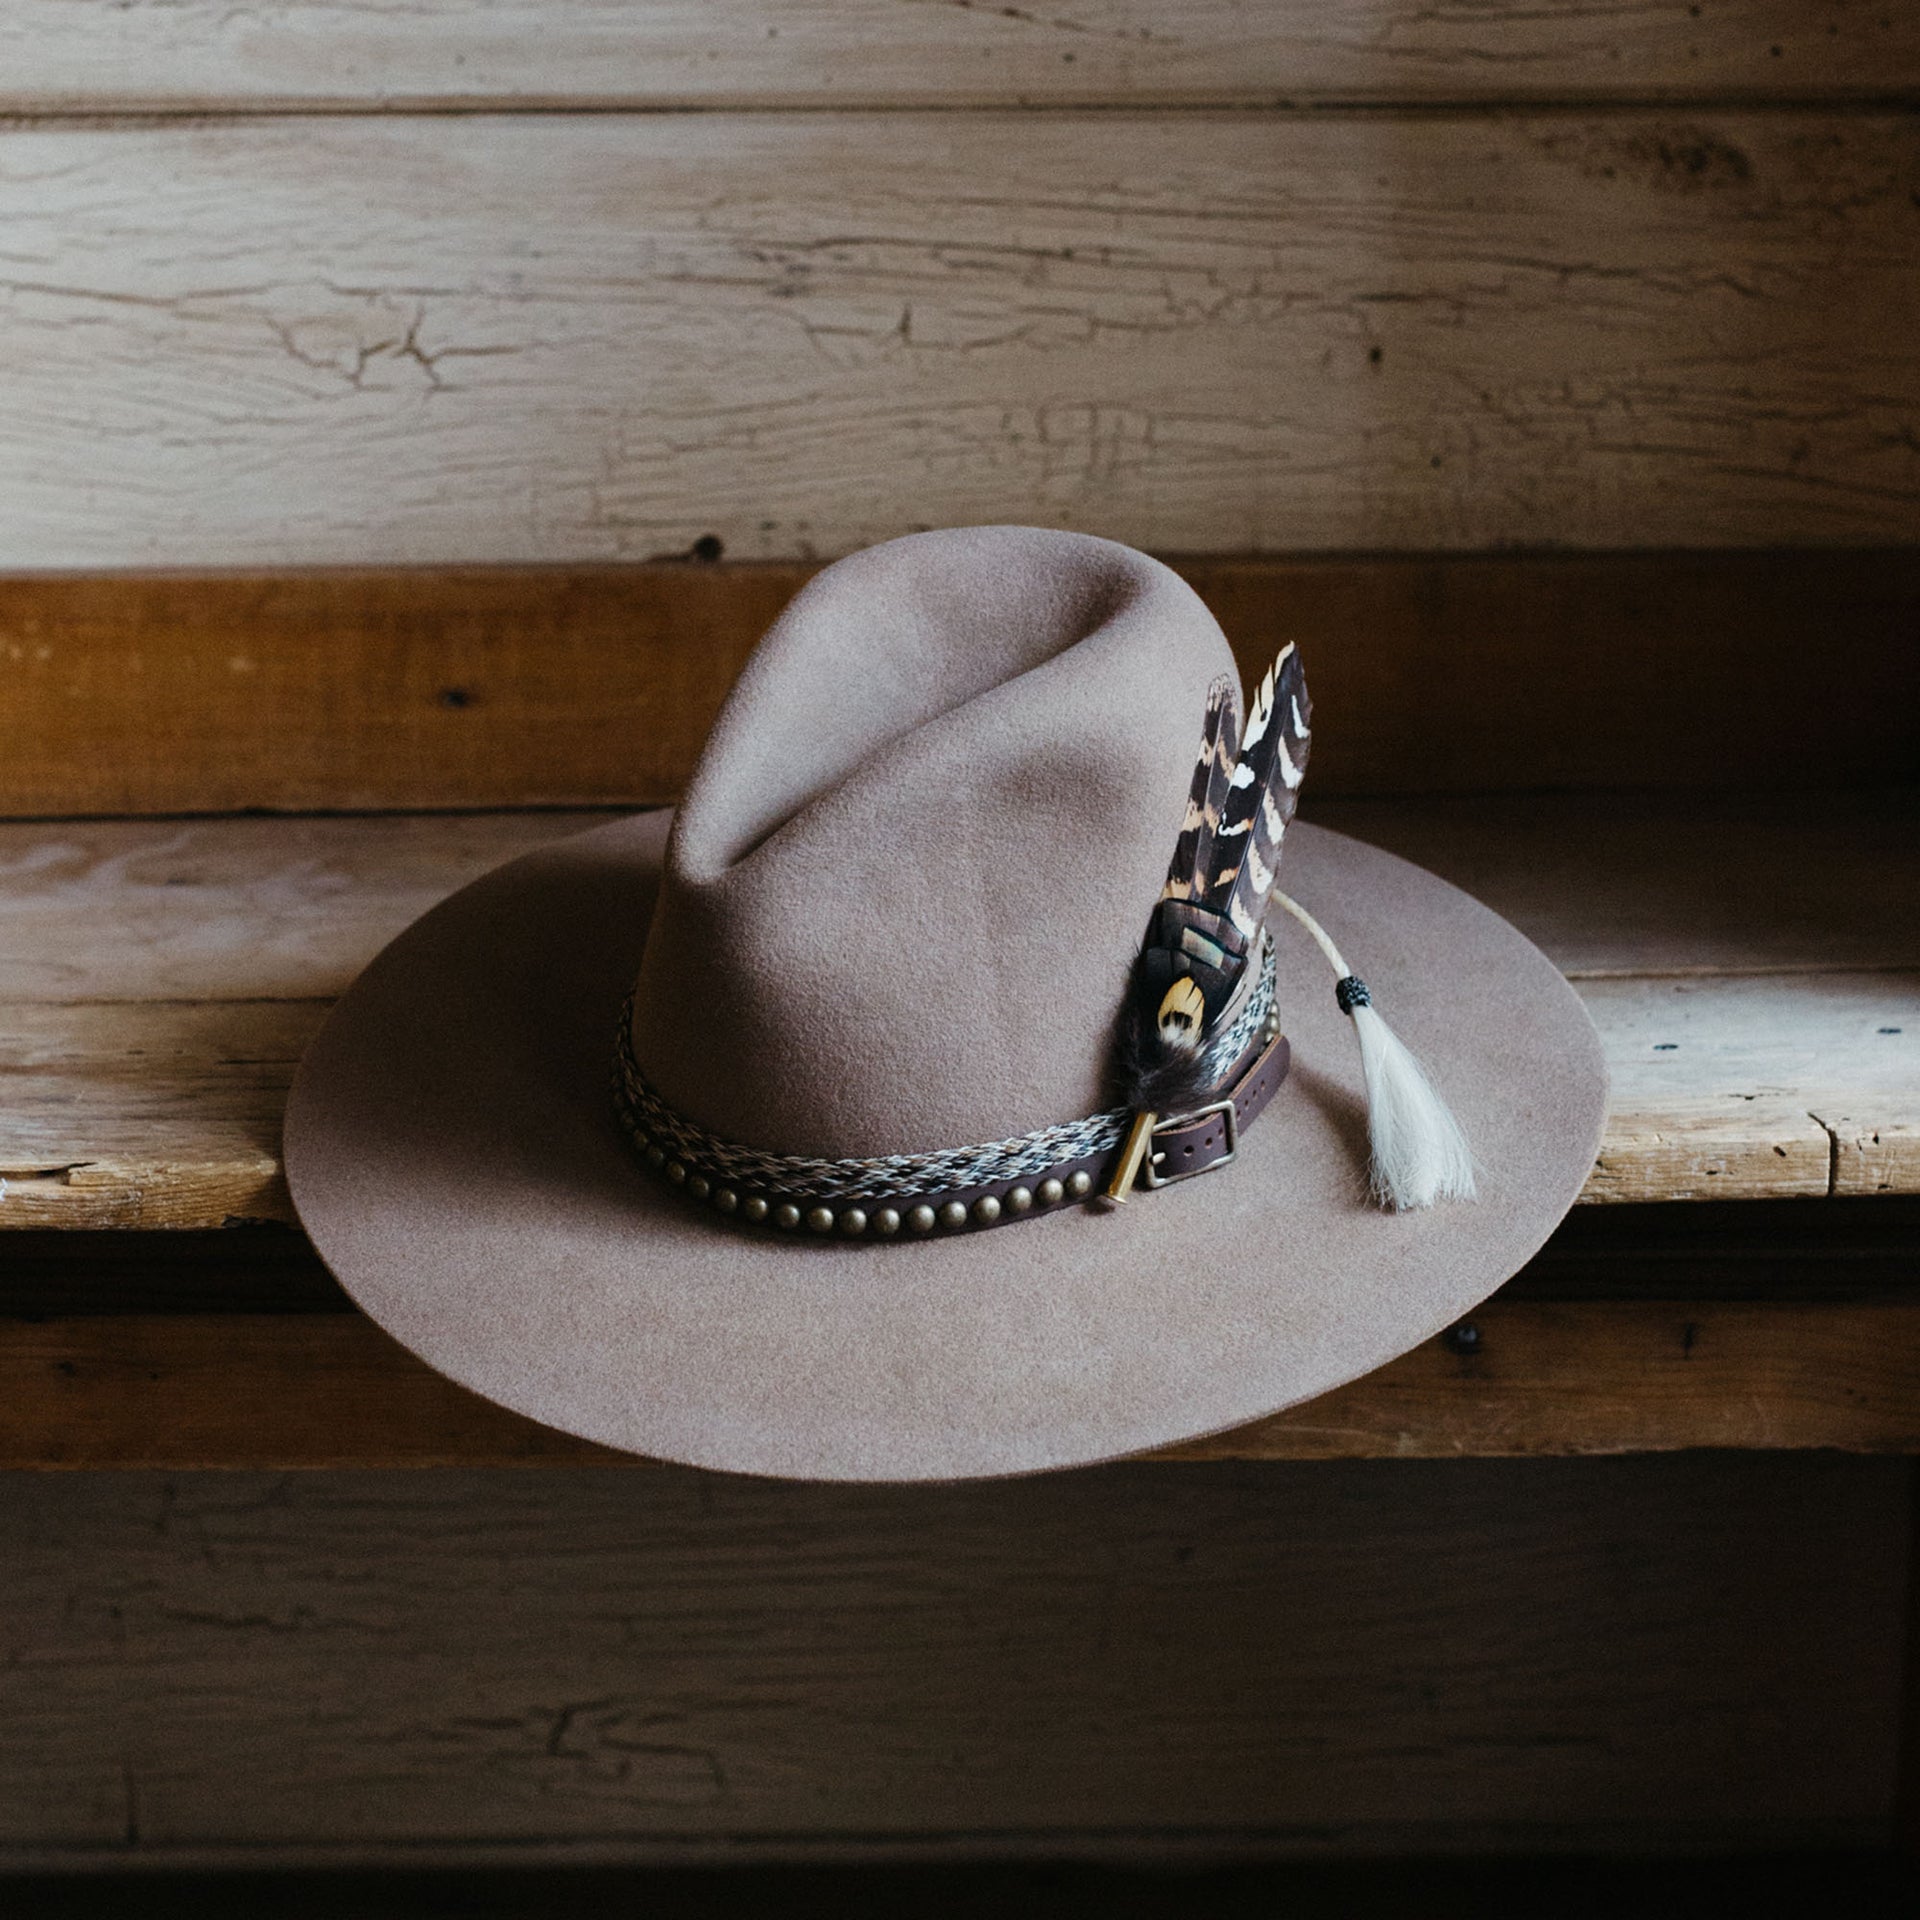 Custom hat shaping bar and leather goods made in Telluride.– Crossbow